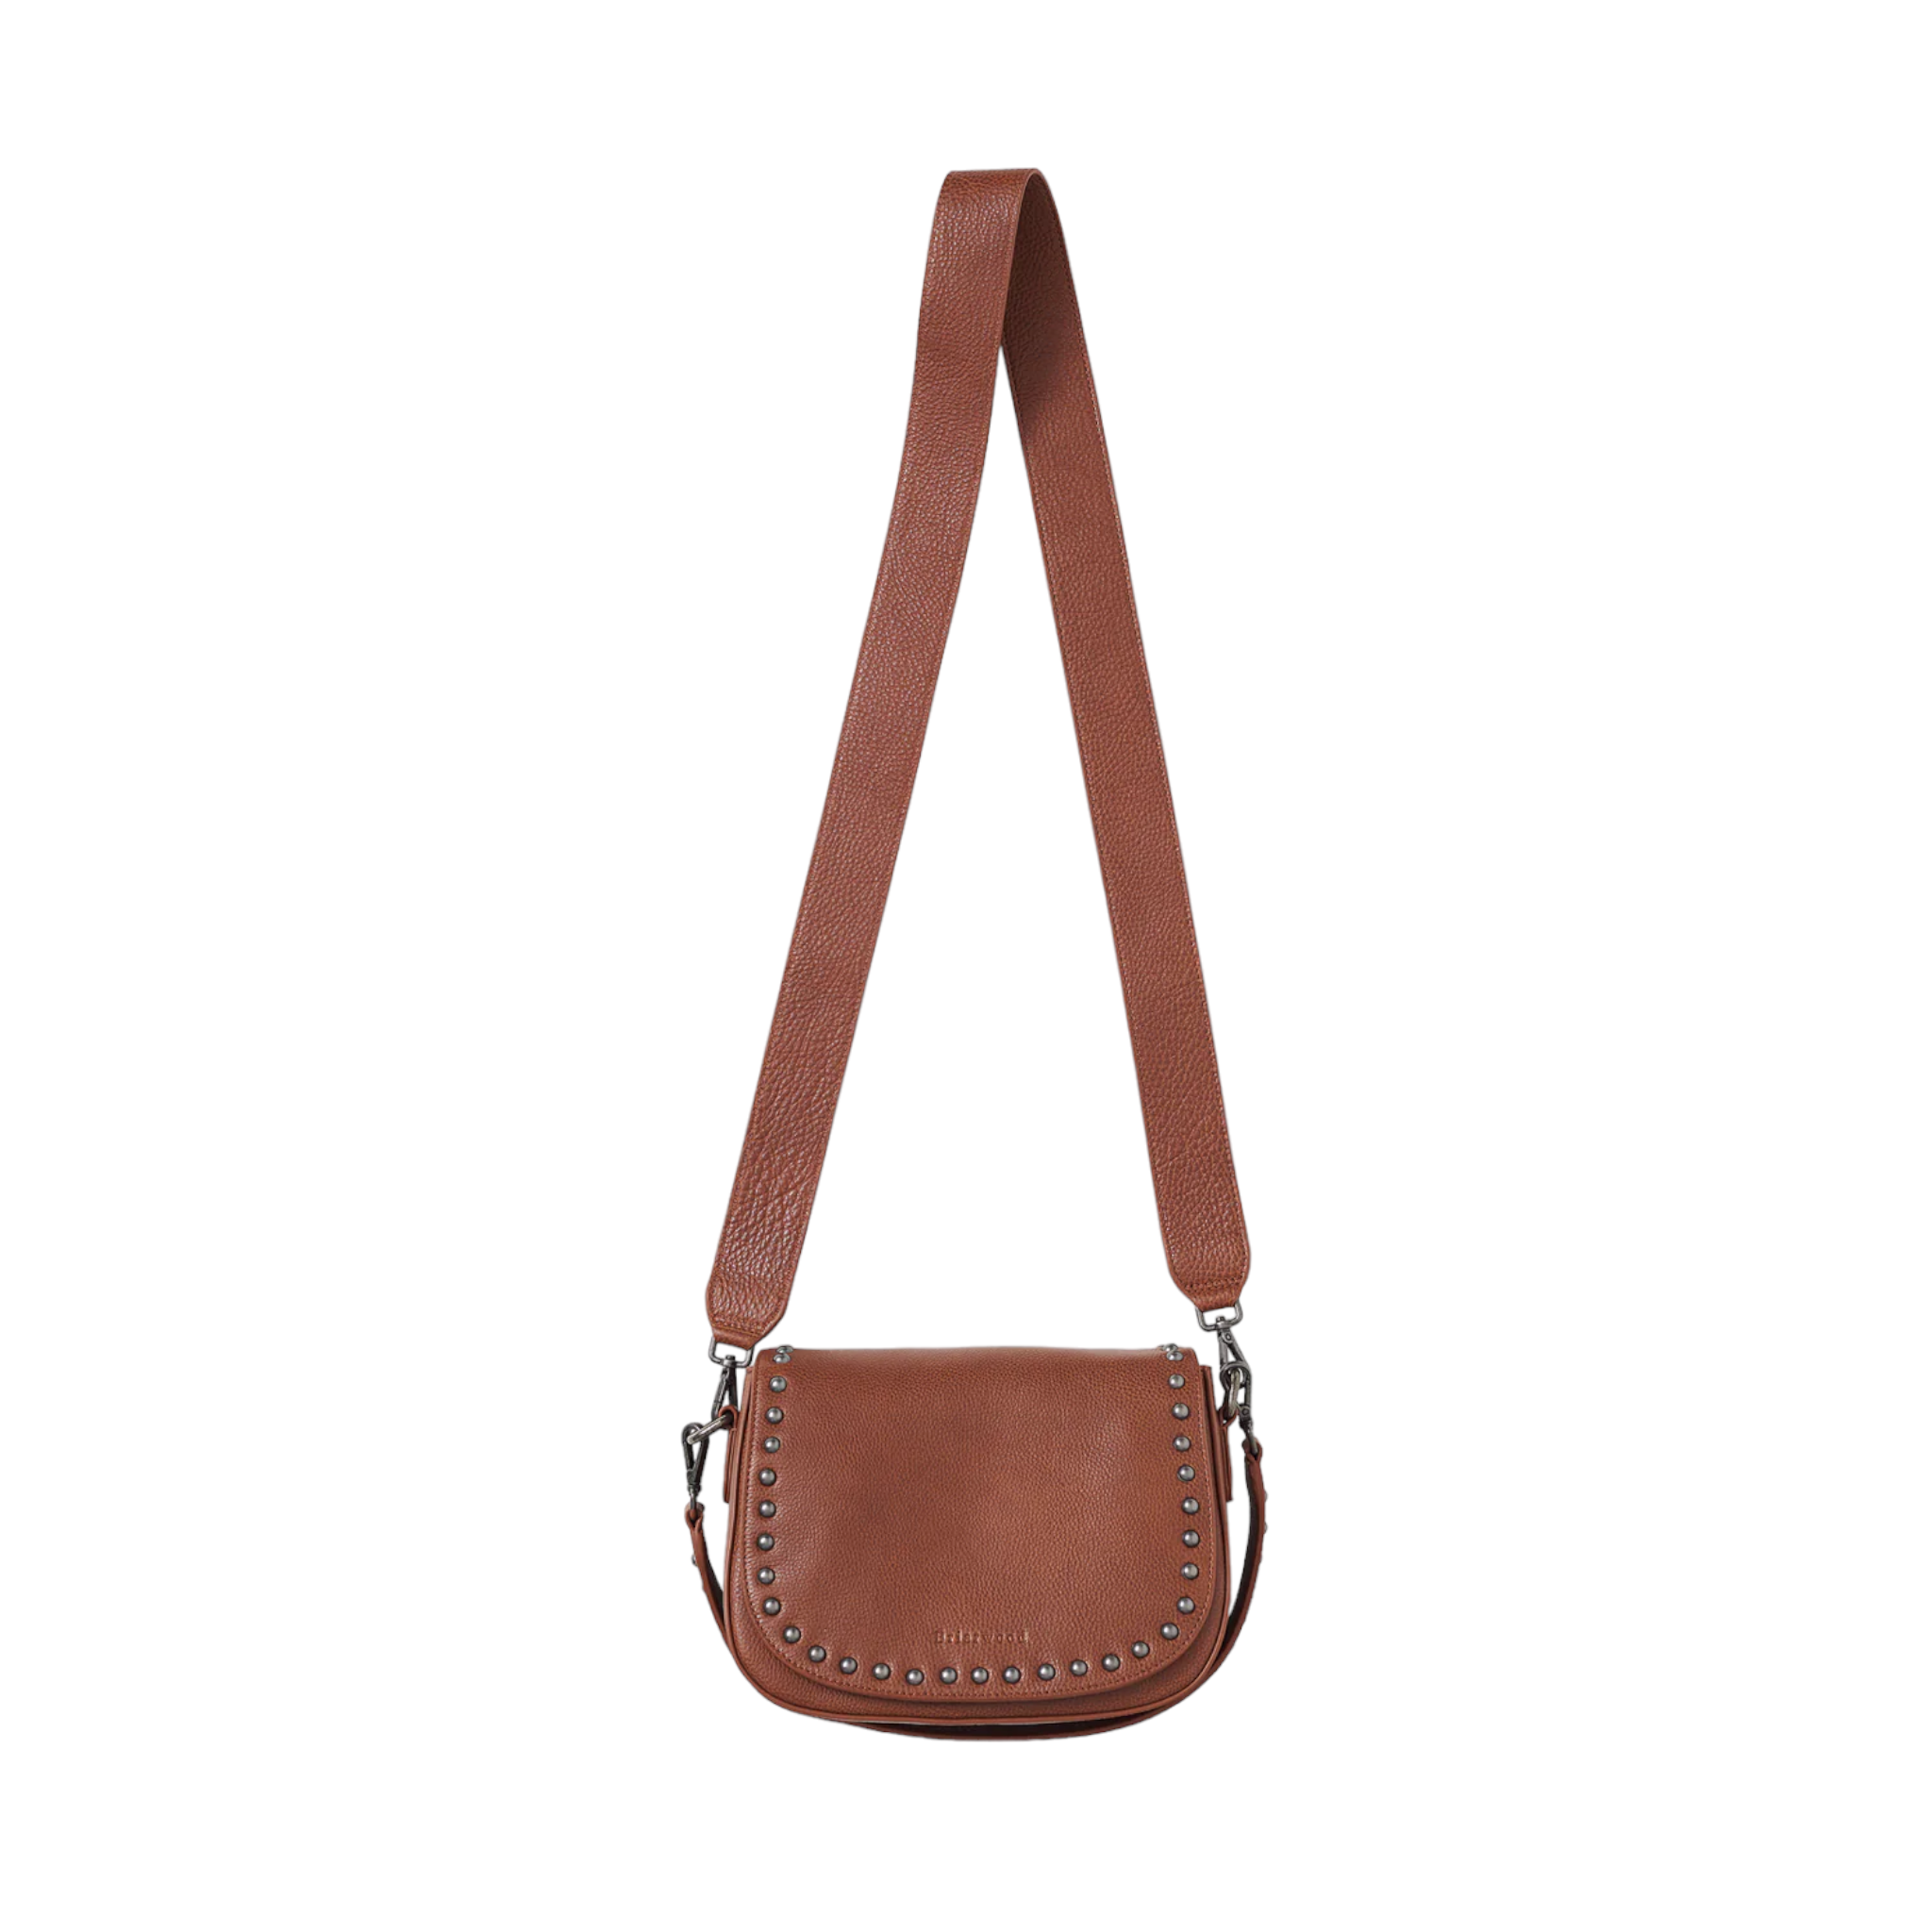 Shop Briarwood Quillie - with shoe&amp;me - from Briarwood - Bags - Handbag, Summer, Womens - [collection]